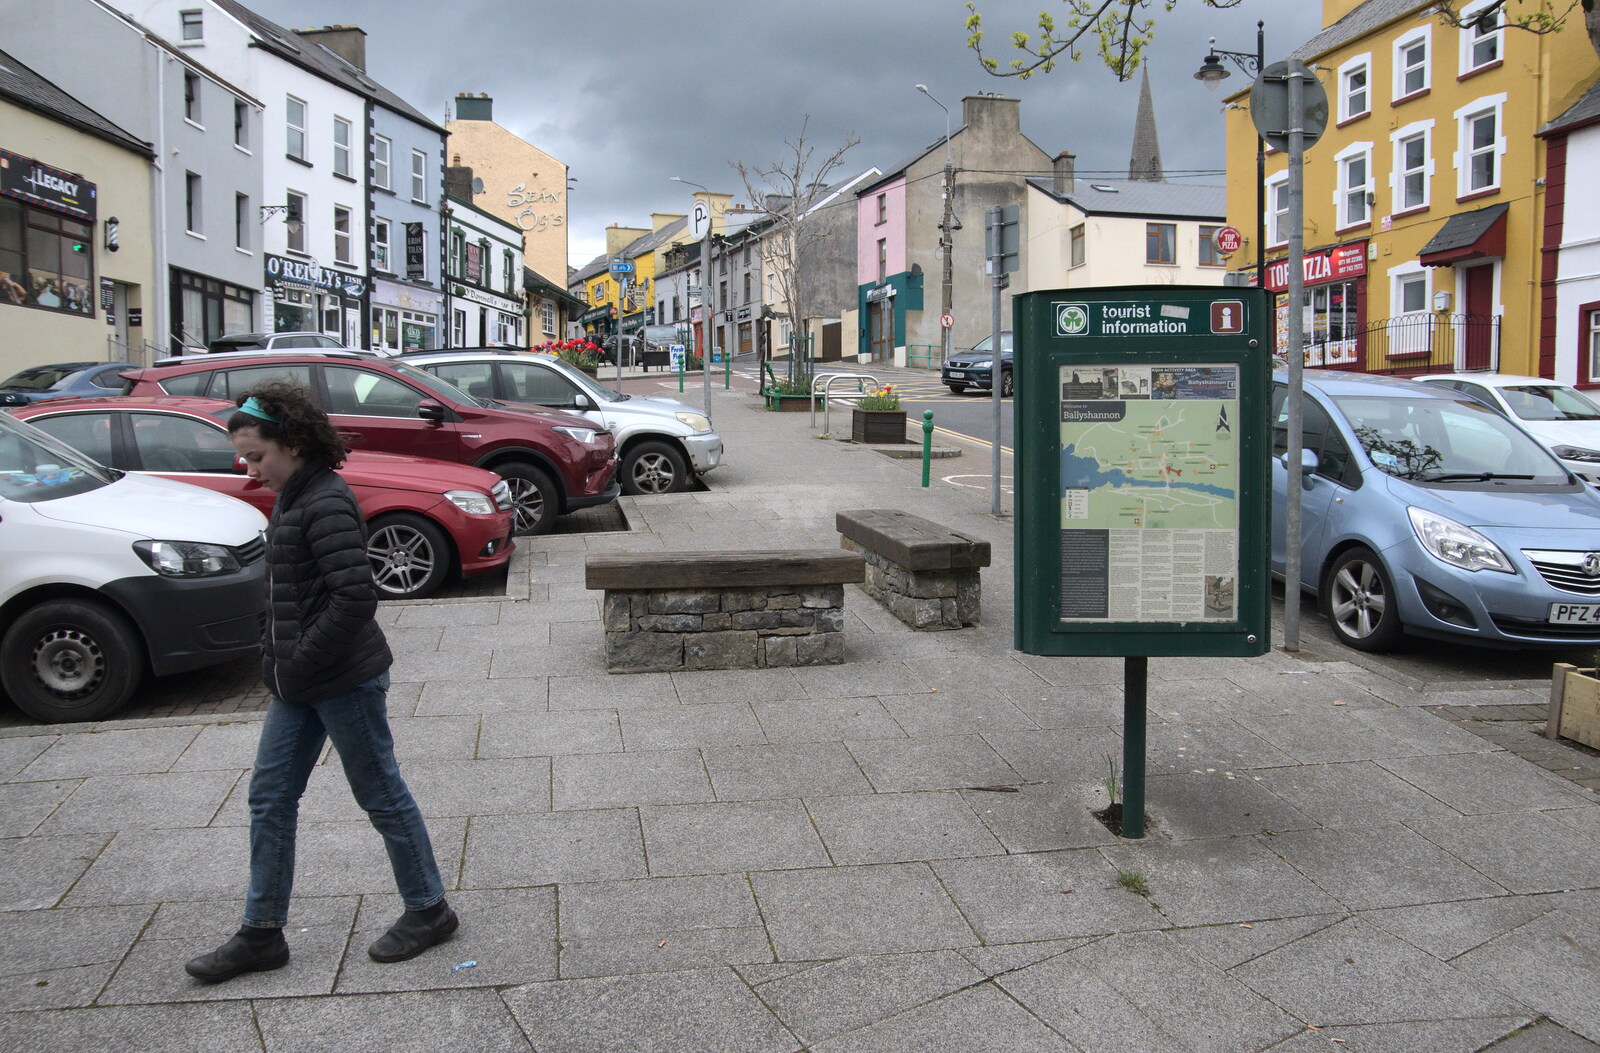 Fern roams around outside the café from Manorhamilton and Bundoran, Leitrim and Donegal, Ireland - 16th April 2022